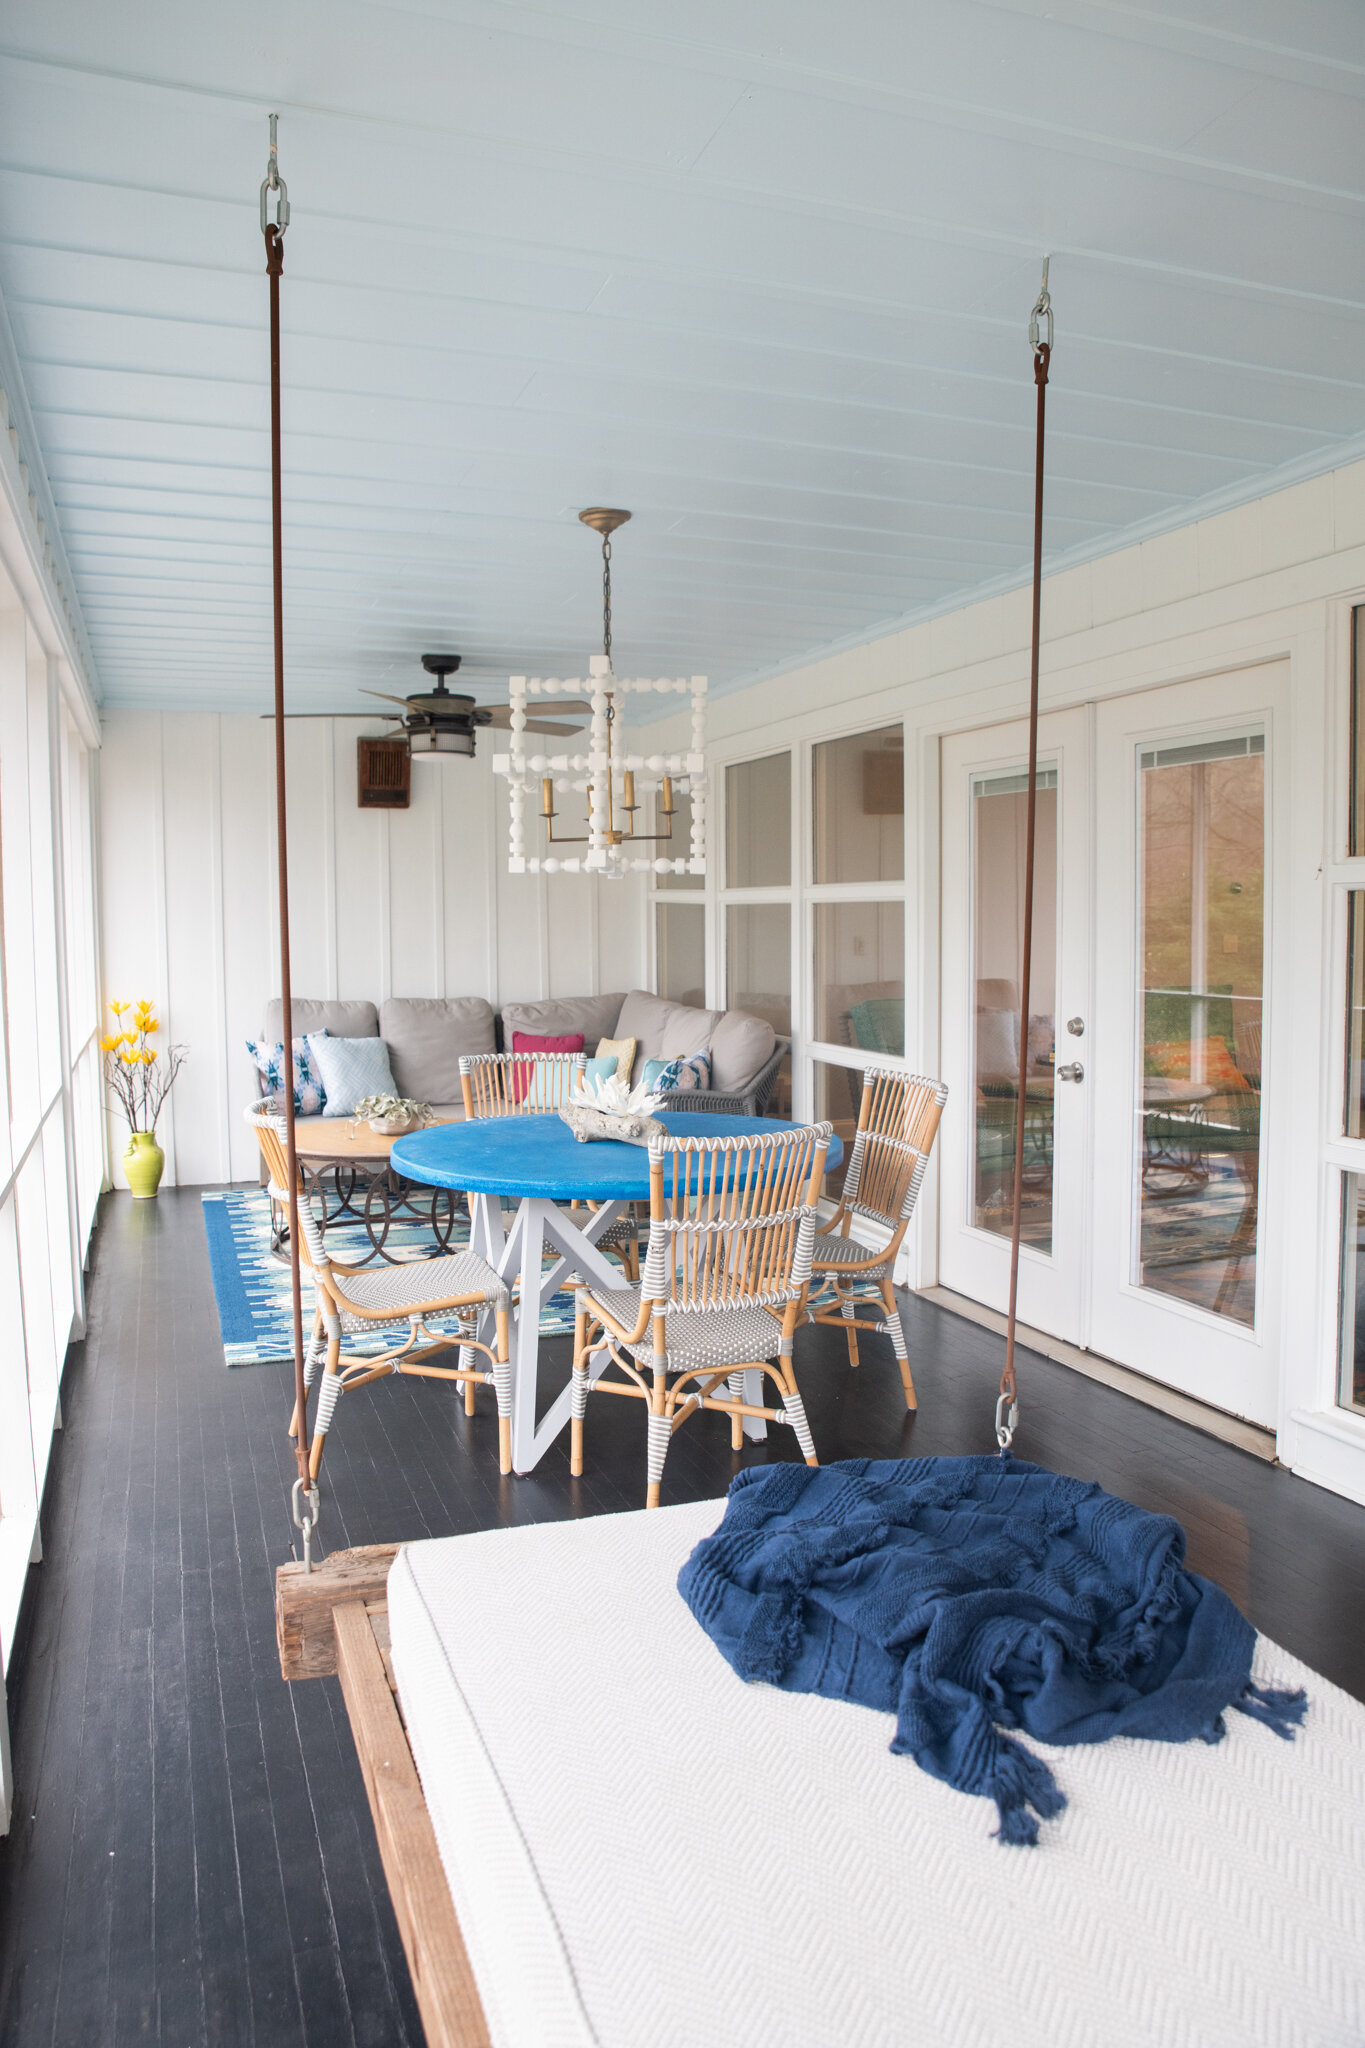 Dwell-Chic-Colorful-Coastal-Porch-Outdoor-Swing.jpg